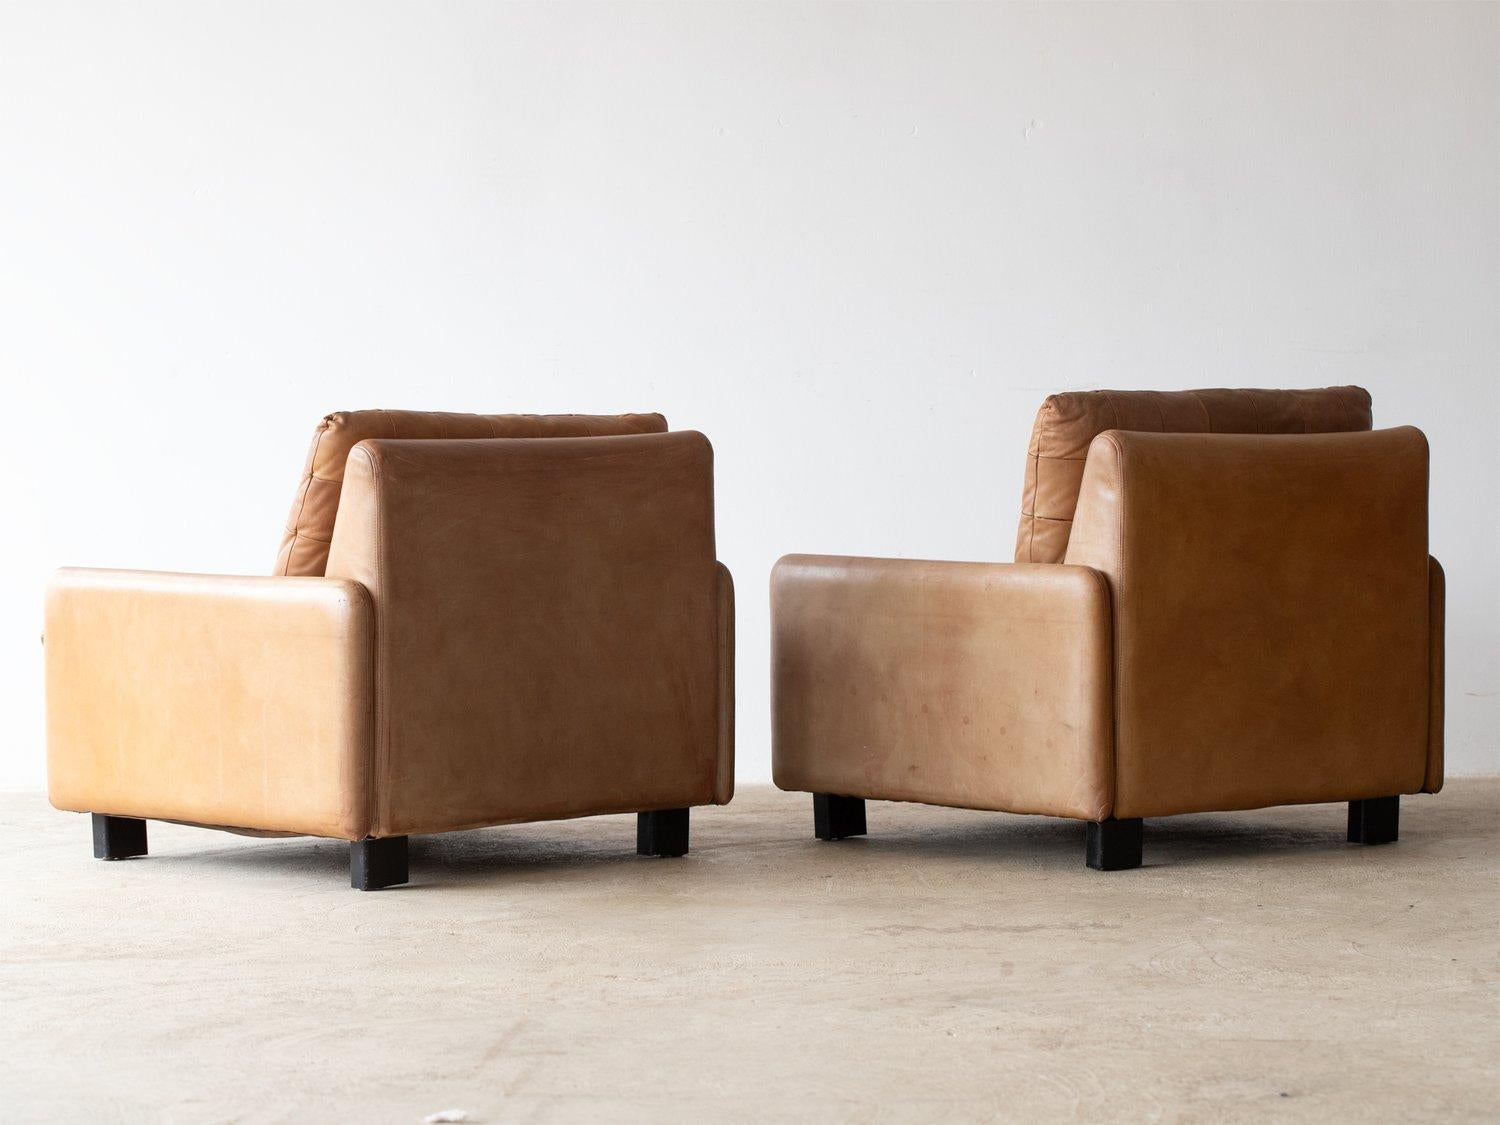 A sublime pair of Italian tan leather armchairs, patchwork leather seat cushions with original small back support cushions.
The tan leather is a perfect mid-century tone with a beautiful patina.
The chairs stand on short black wooden legs with